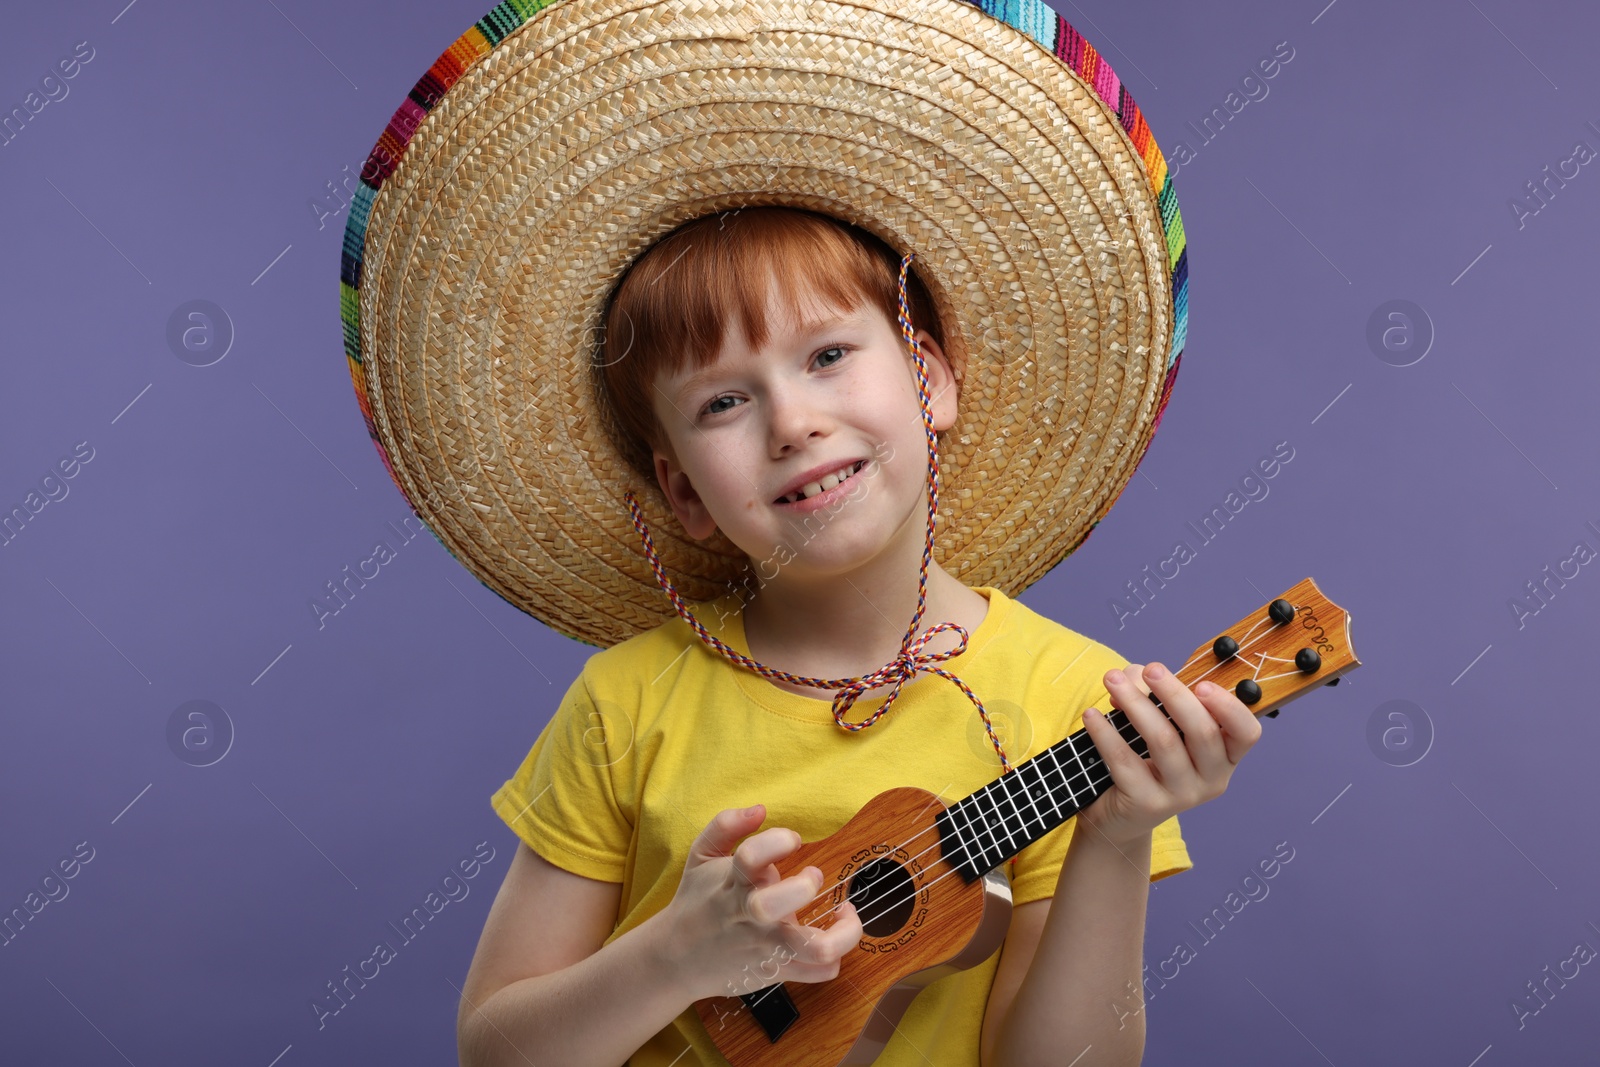 Photo of Cute boy in Mexican sombrero hat playing ukulele on violet background